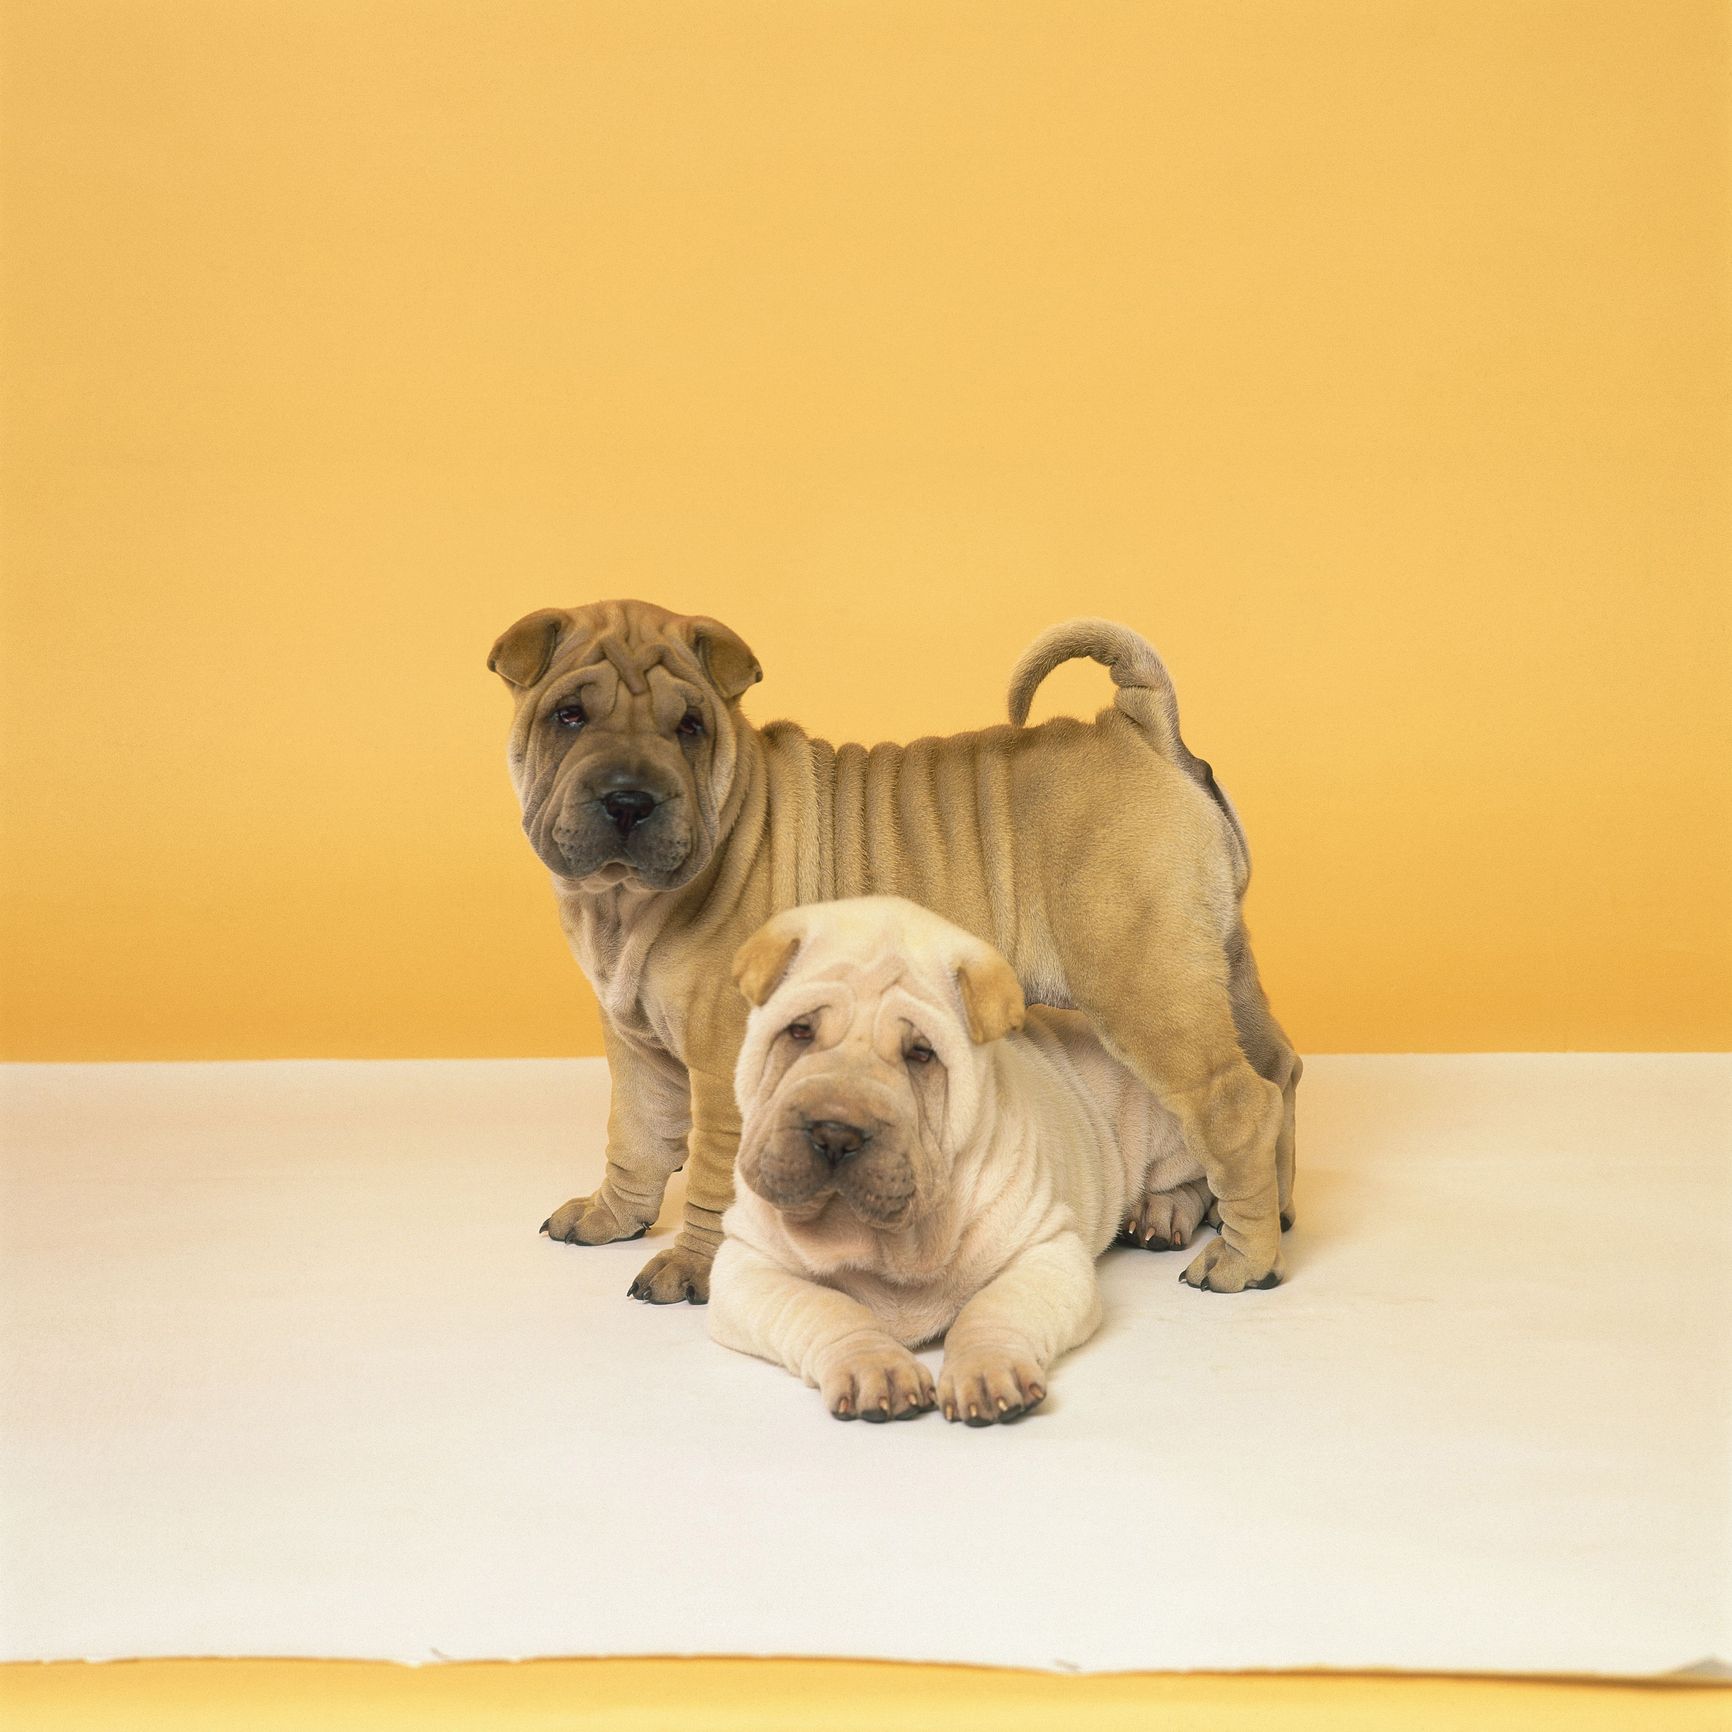 11 Chinese Dog Breeds: Shar Pei, Chow Chow, and More